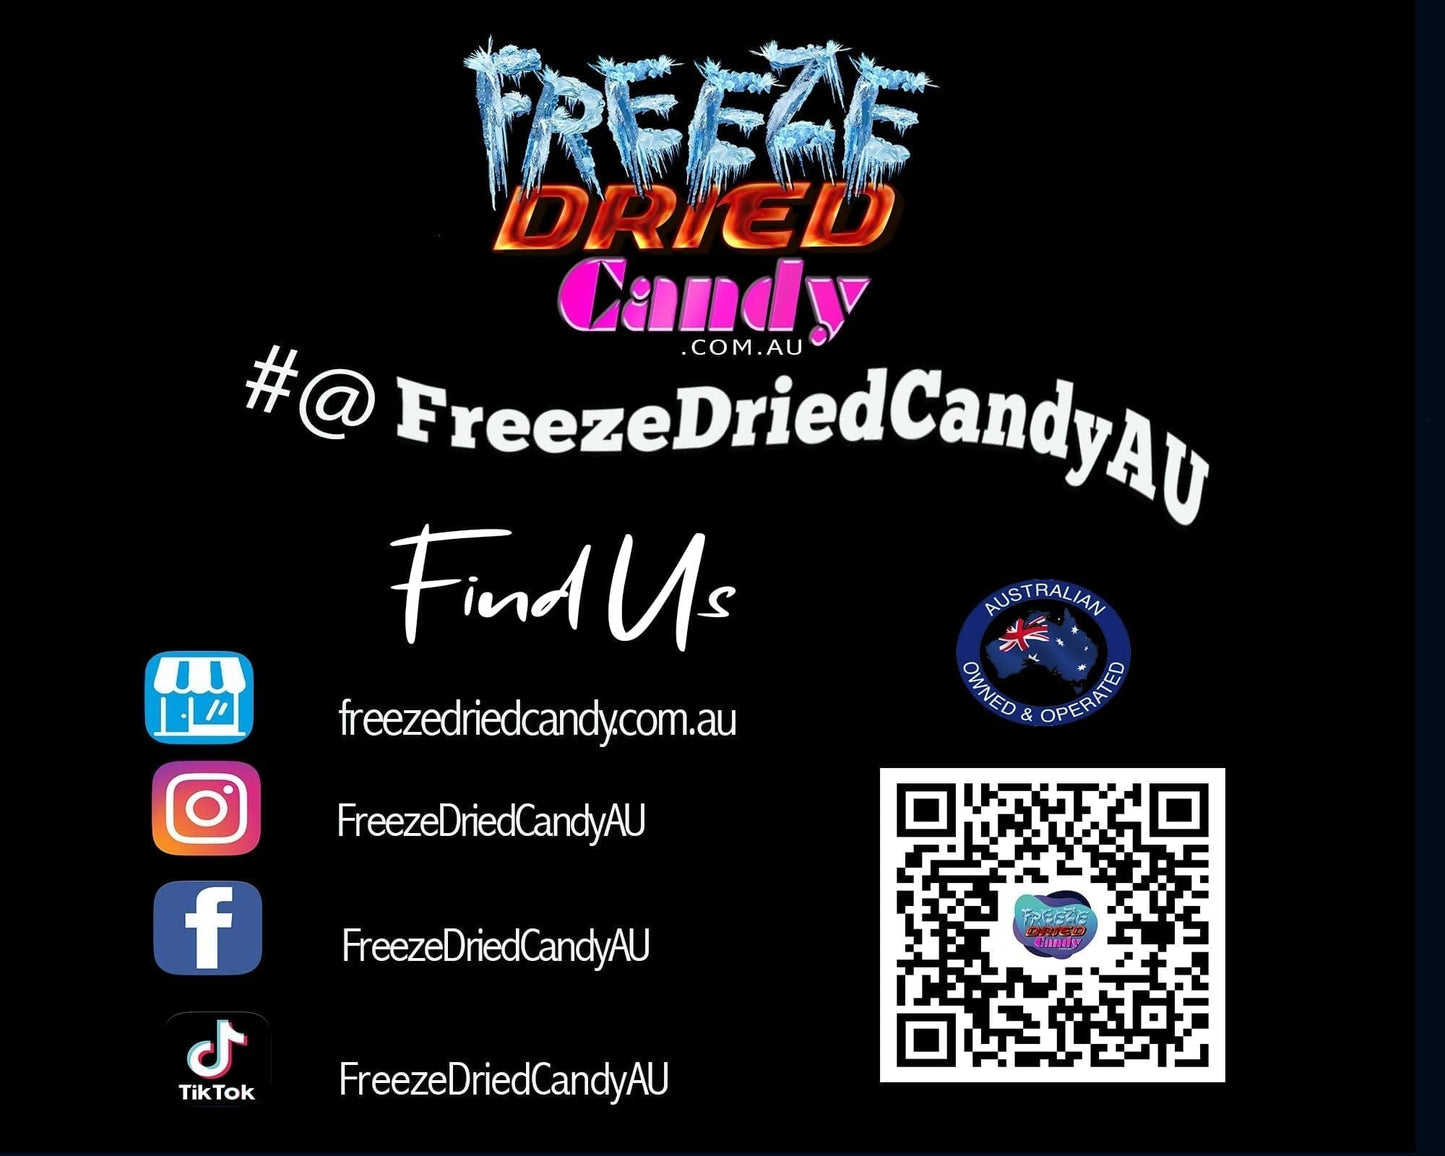 freeze Dried Candy Australia   Find Us on the internet